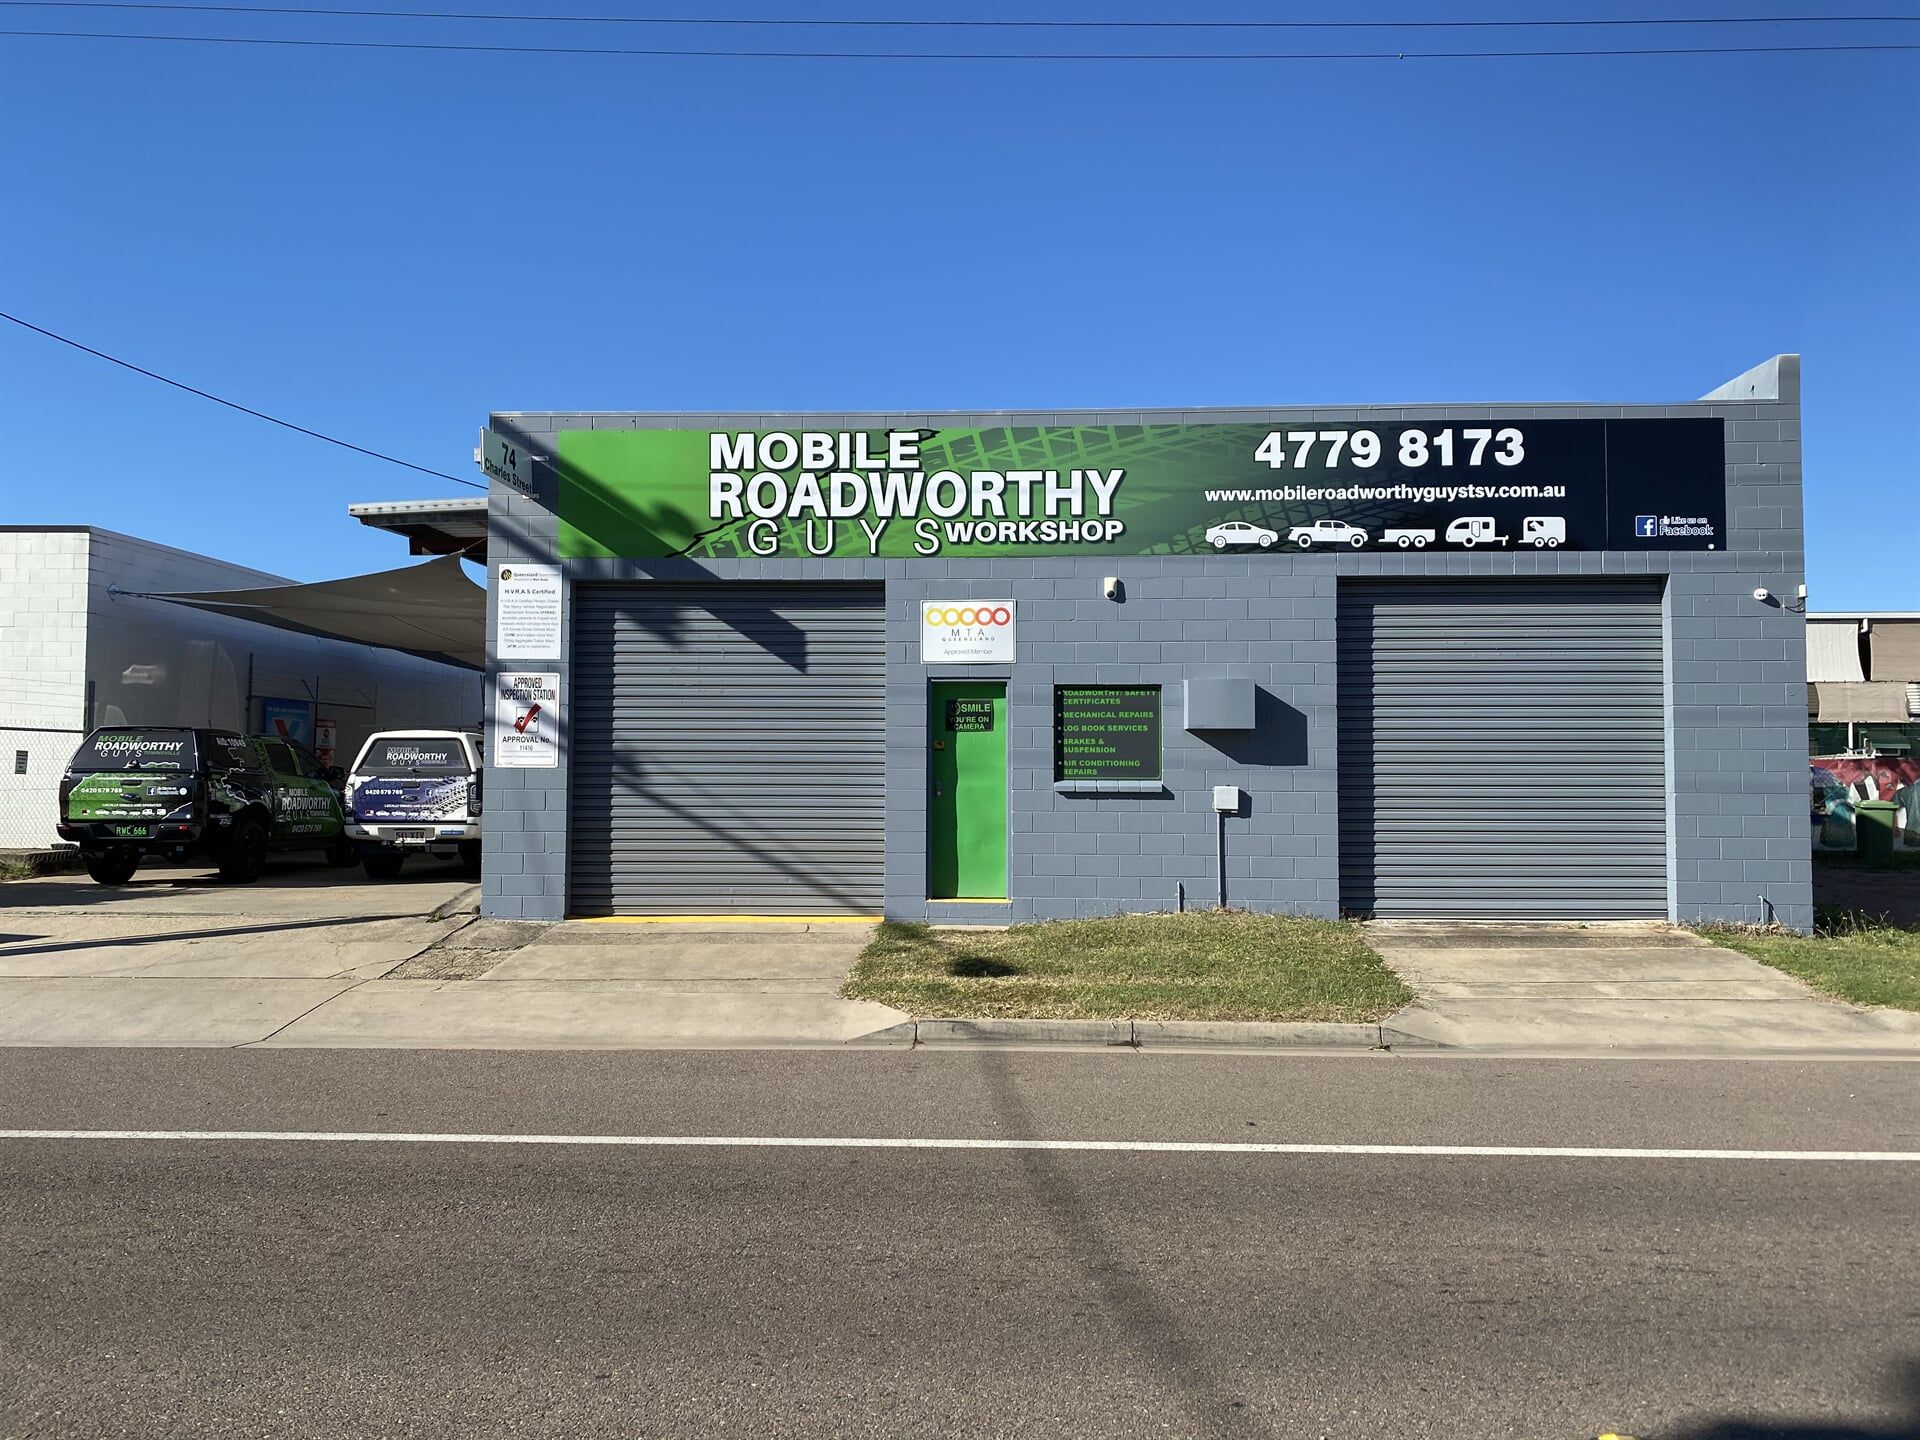 Workshop — Mobile Roadworthy Guys Townsville in Aitkenvale, QLD